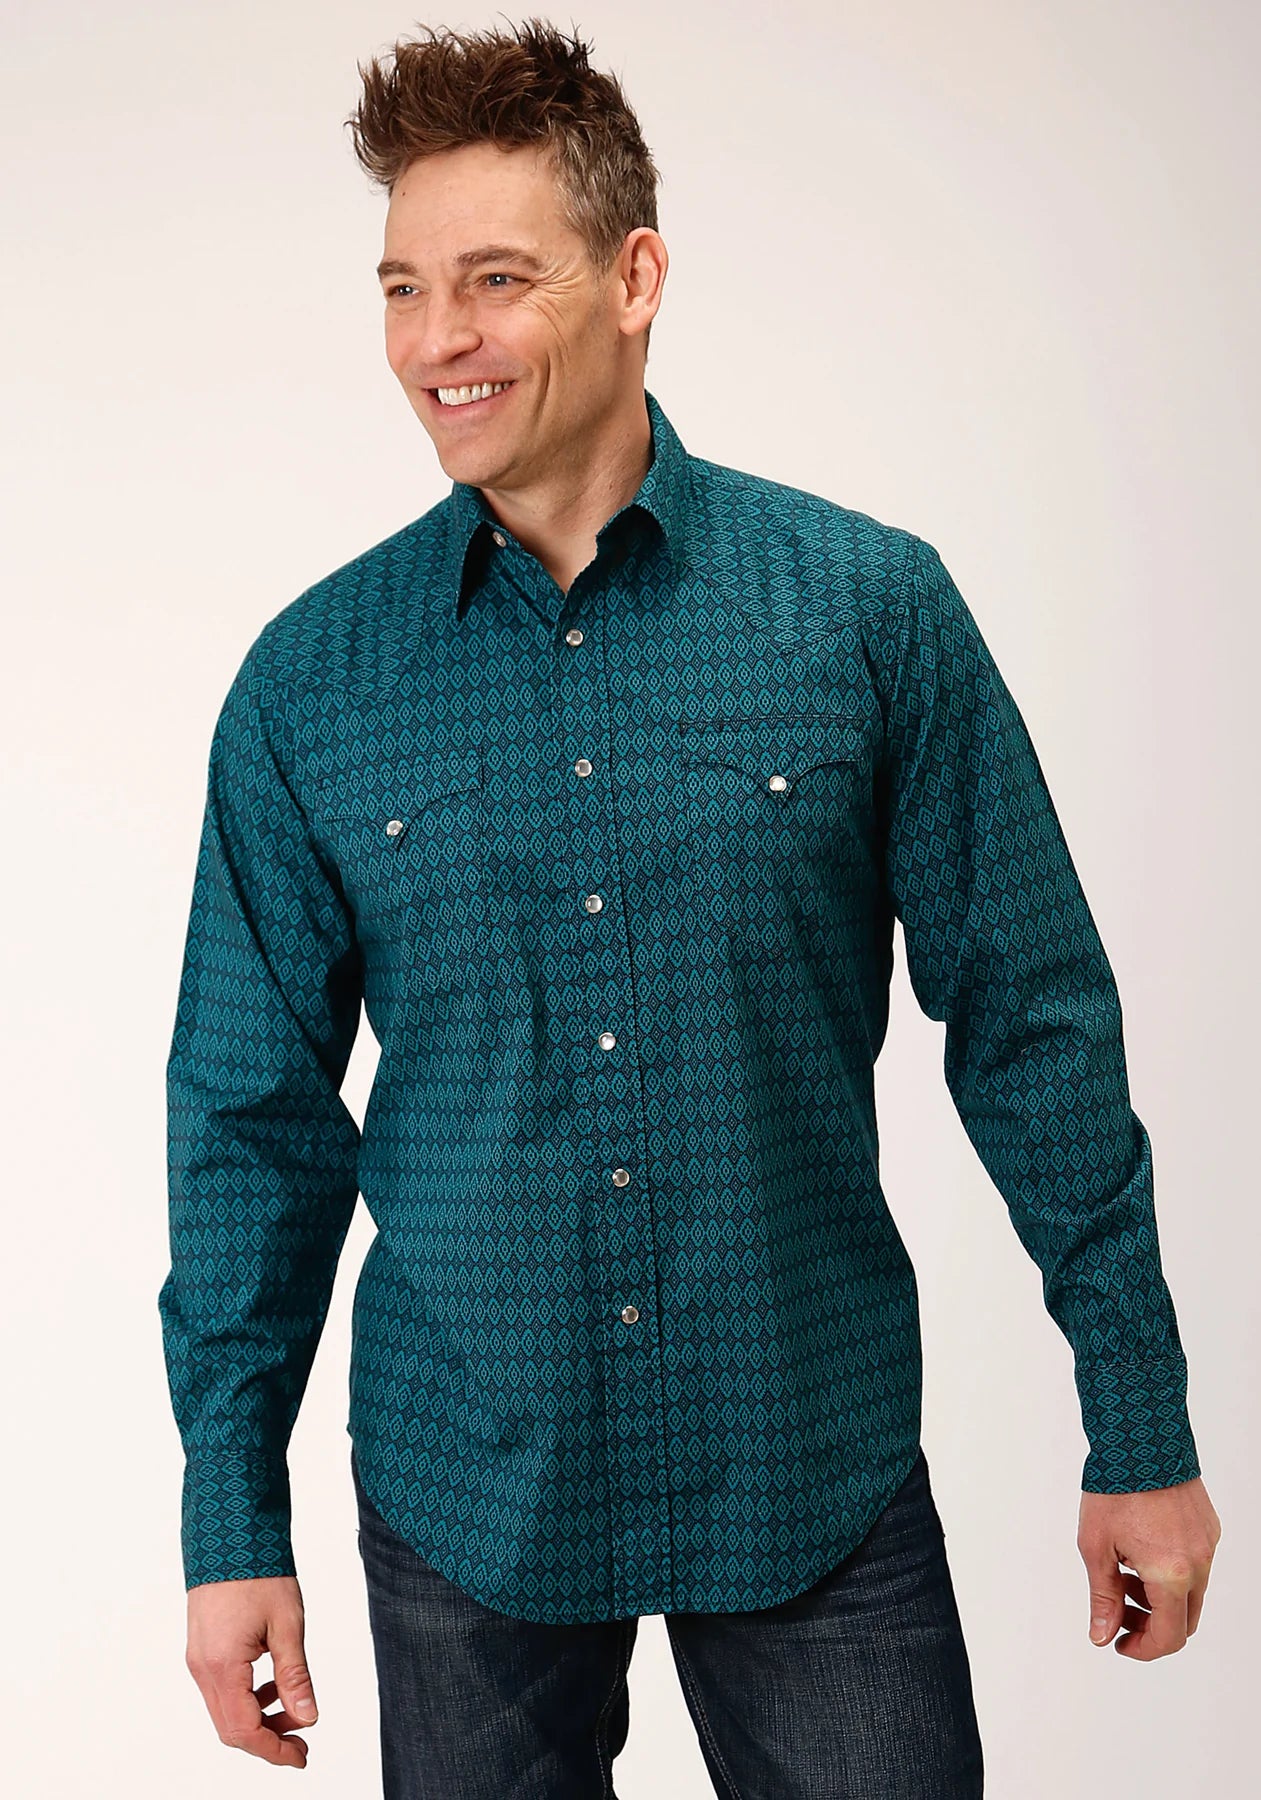 03-001-0064-1011 Roper Mens West Made Collection LS Shirt Print Green